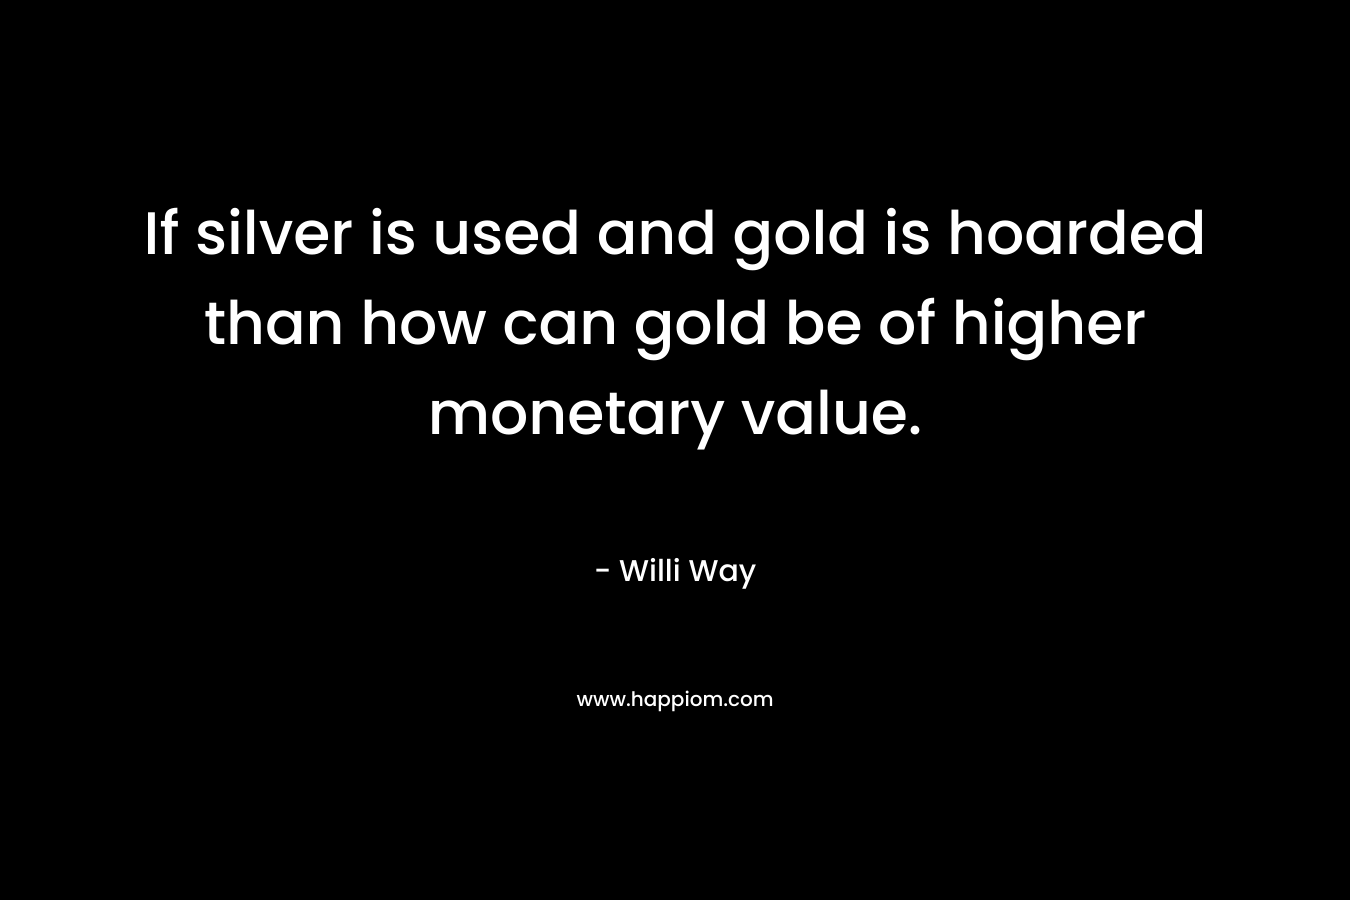 If silver is used and gold is hoarded than how can gold be of higher monetary value. – Willi Way